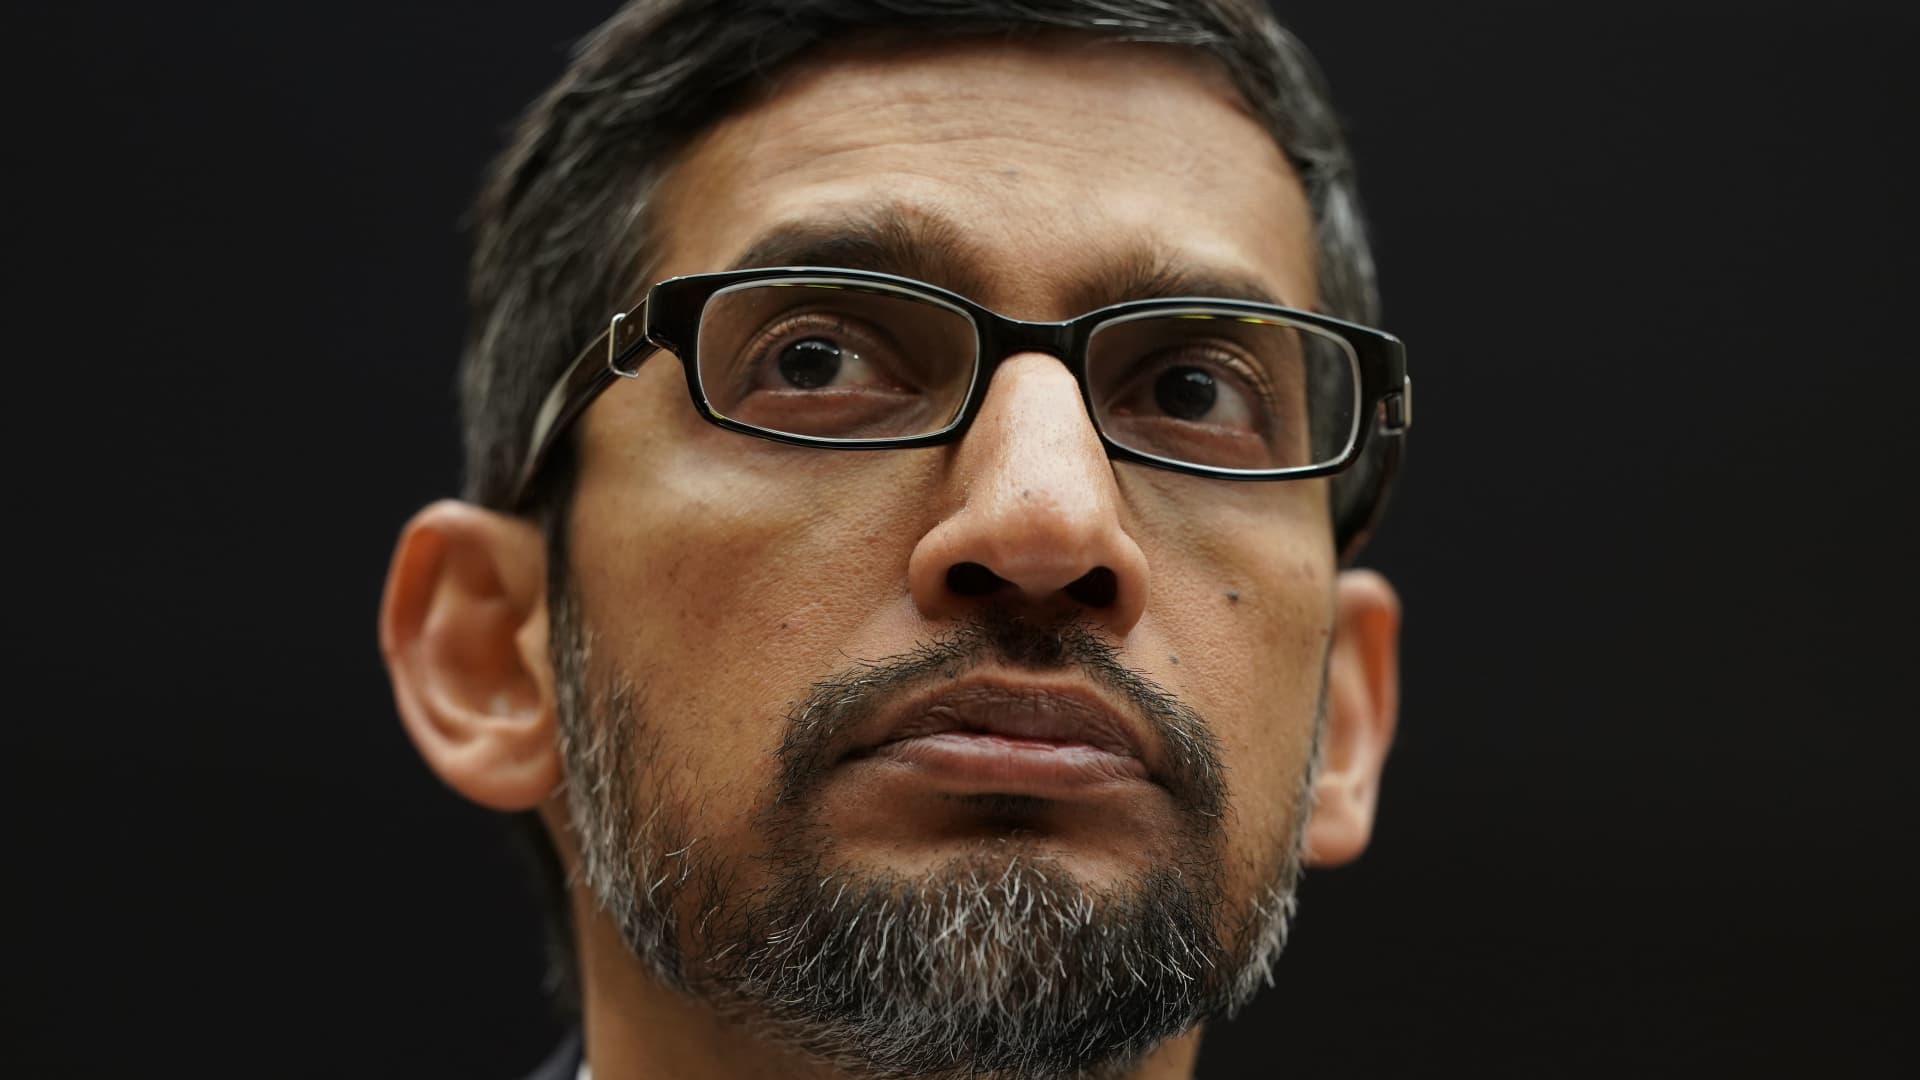 'Godfather of A.I.' leaves Google after a decade to warn society of technology he's touted